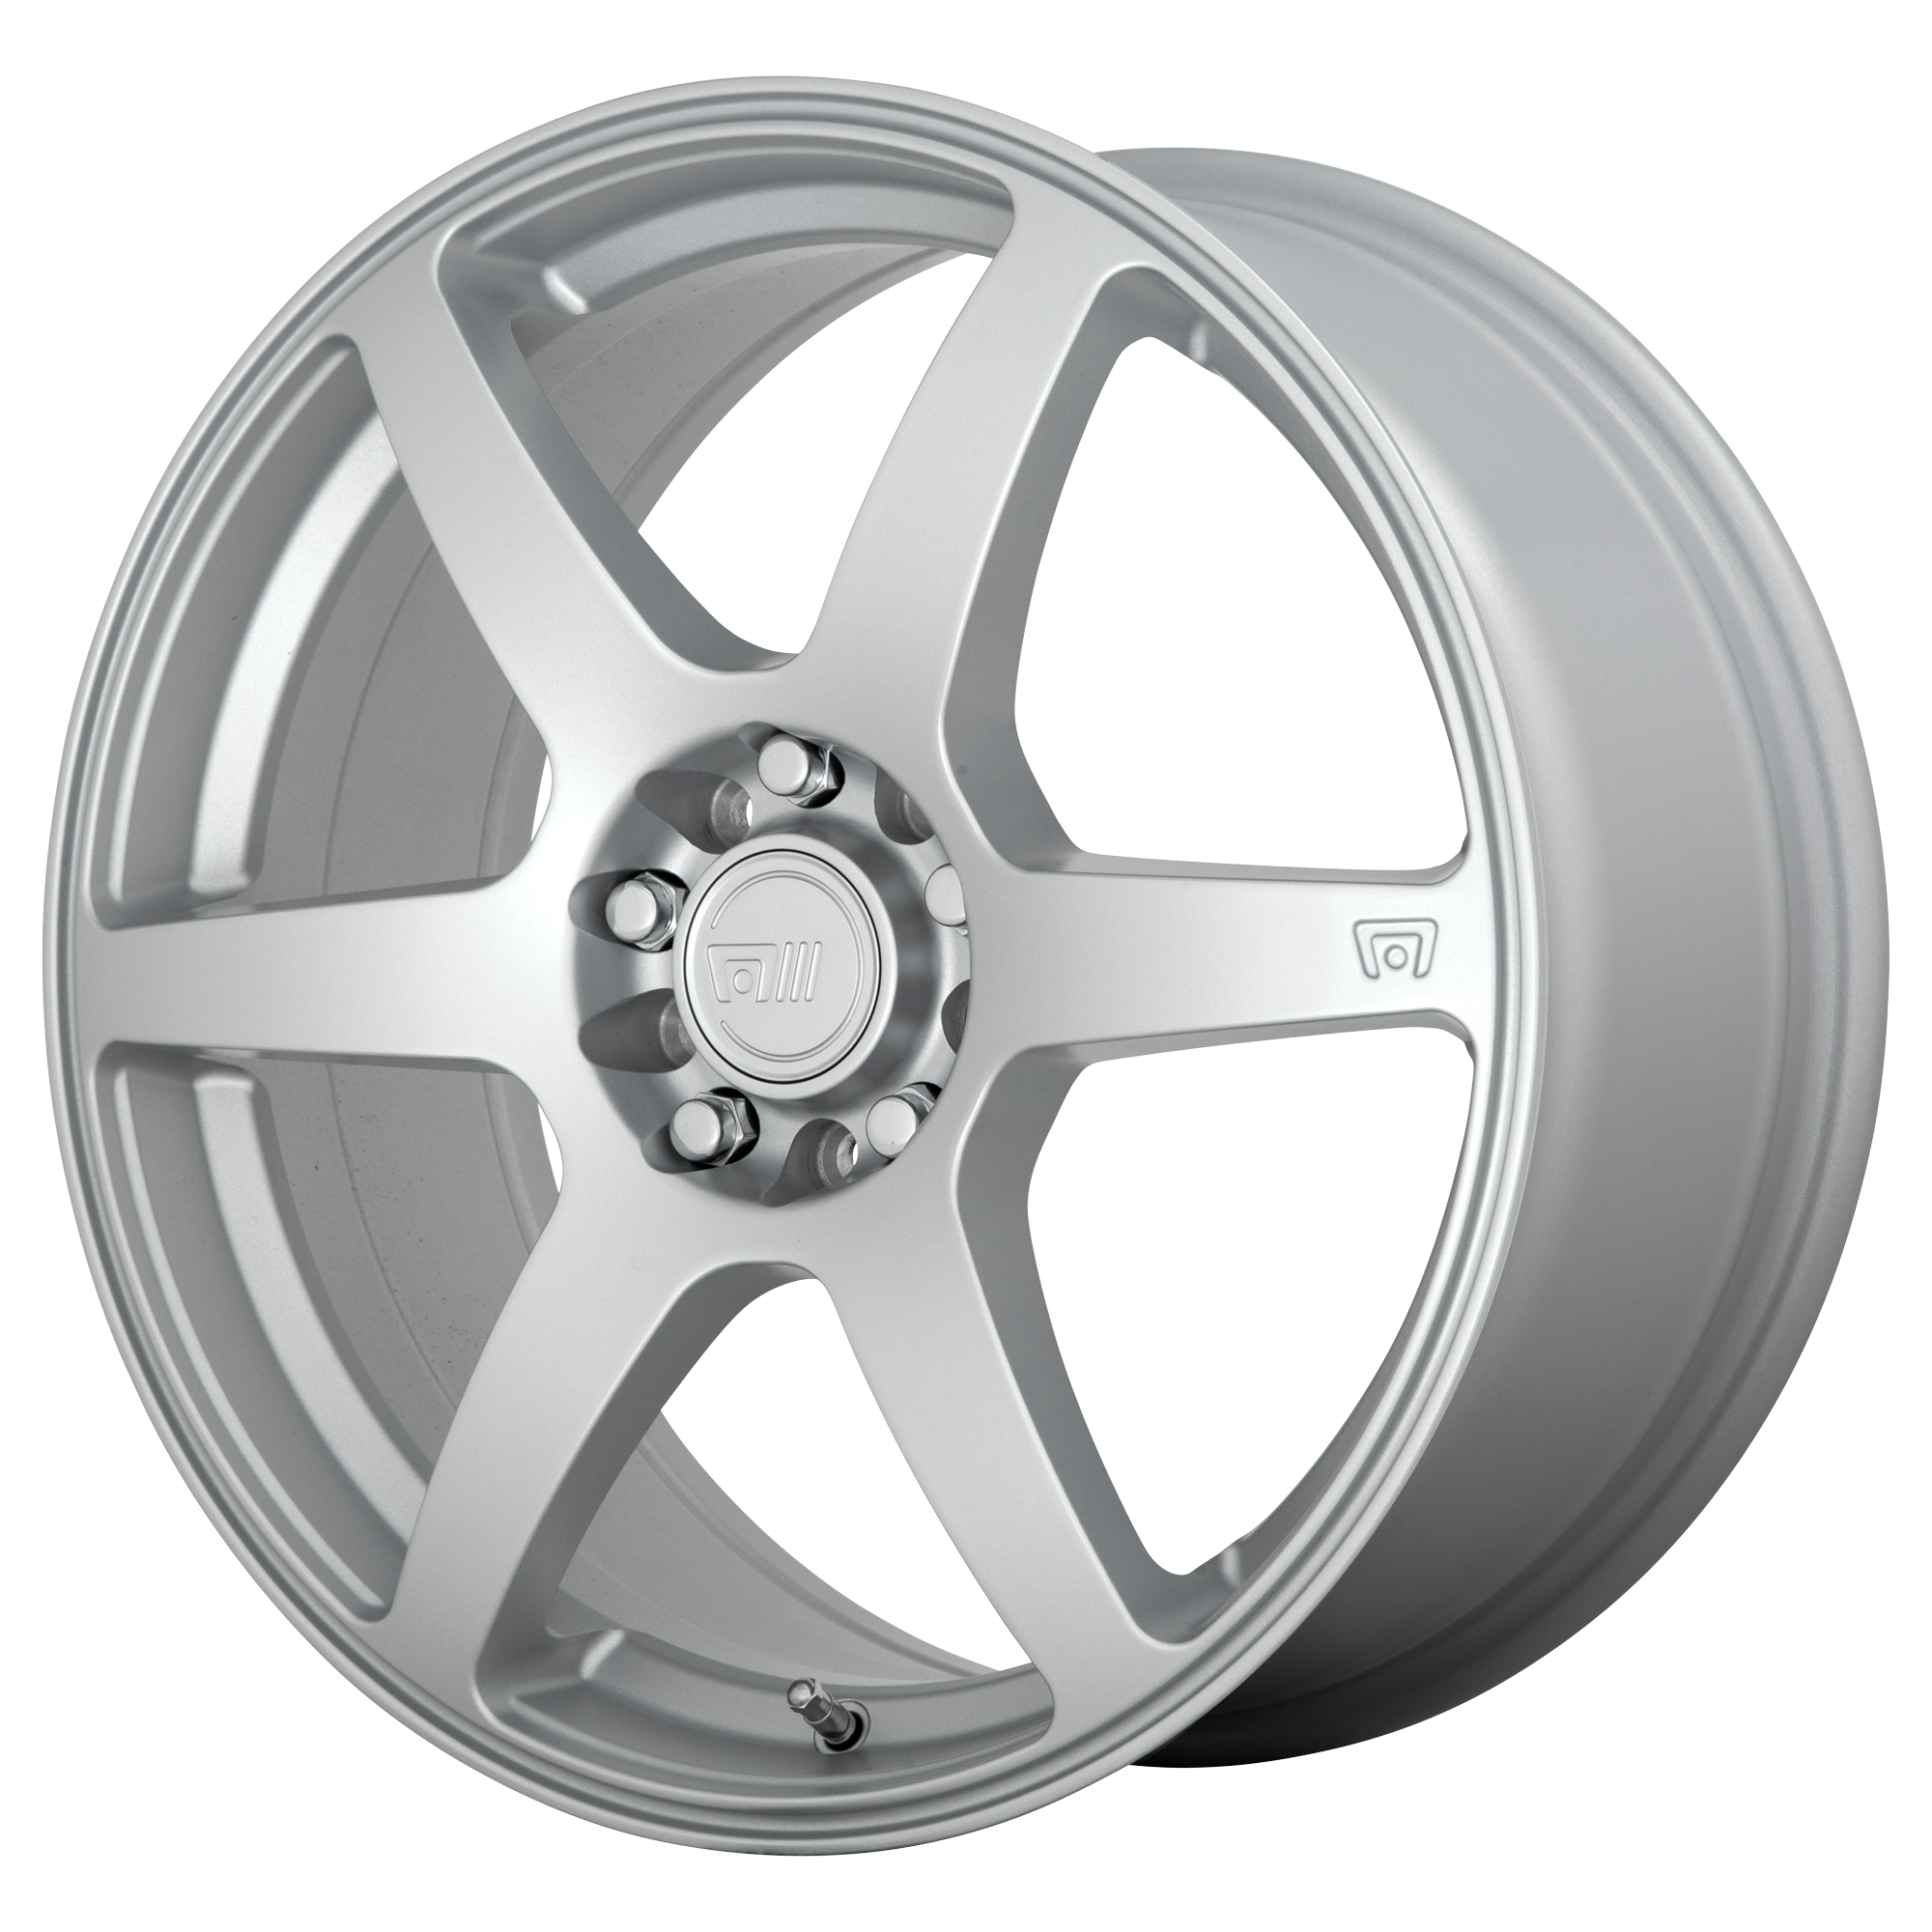 CS6 18x8 5x114.30/5x120.00 HYPER SILVER (35 mm) - Tires and Engine Performance